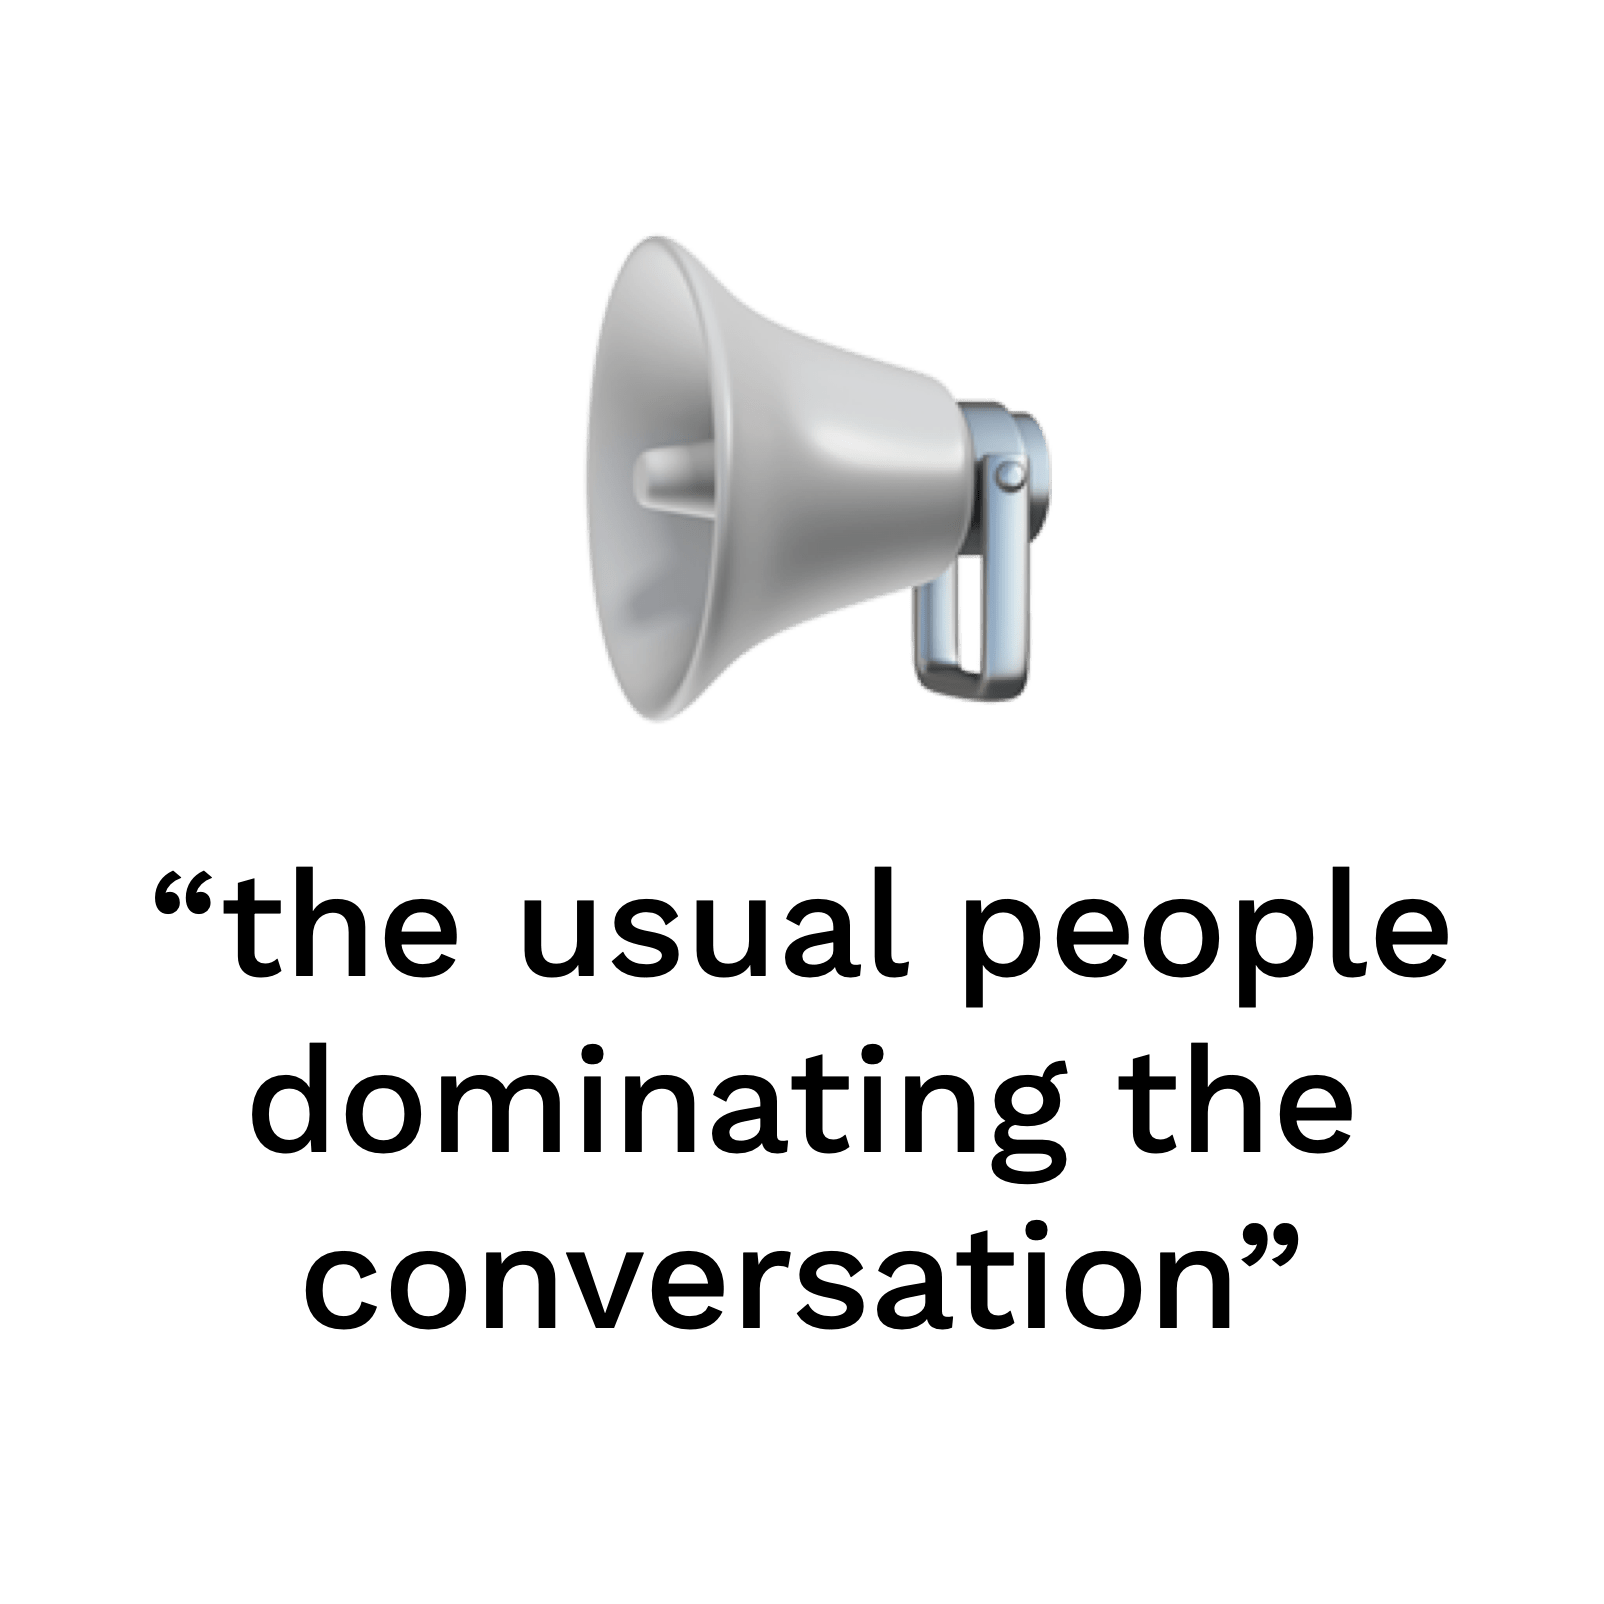 "the usual people dominating the conversation"